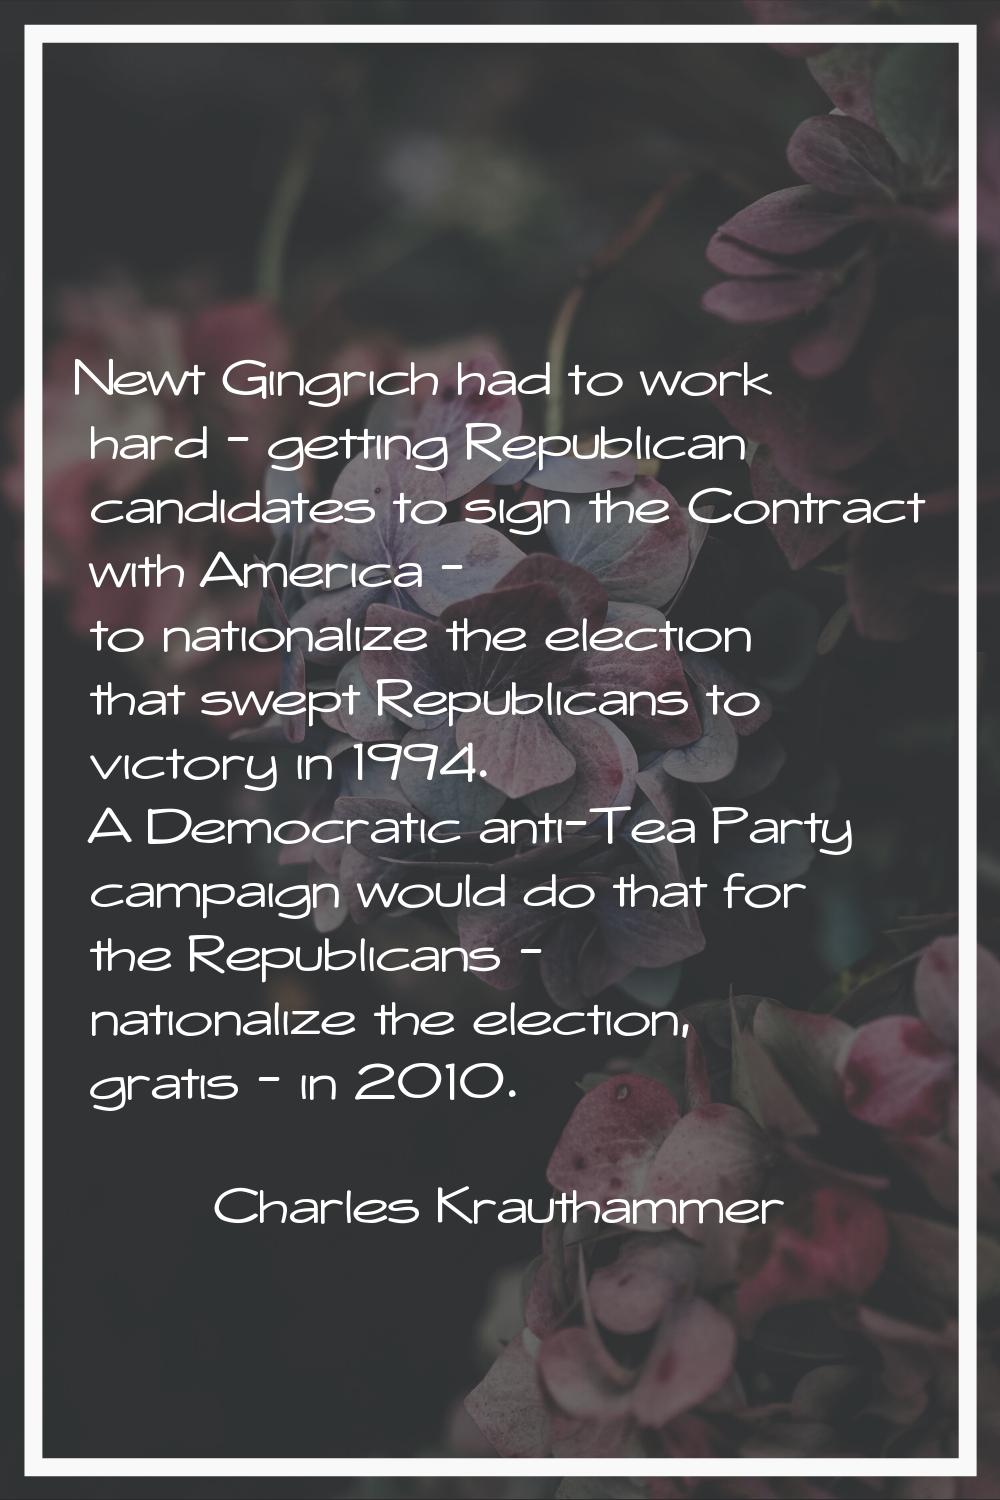 Newt Gingrich had to work hard - getting Republican candidates to sign the Contract with America - 